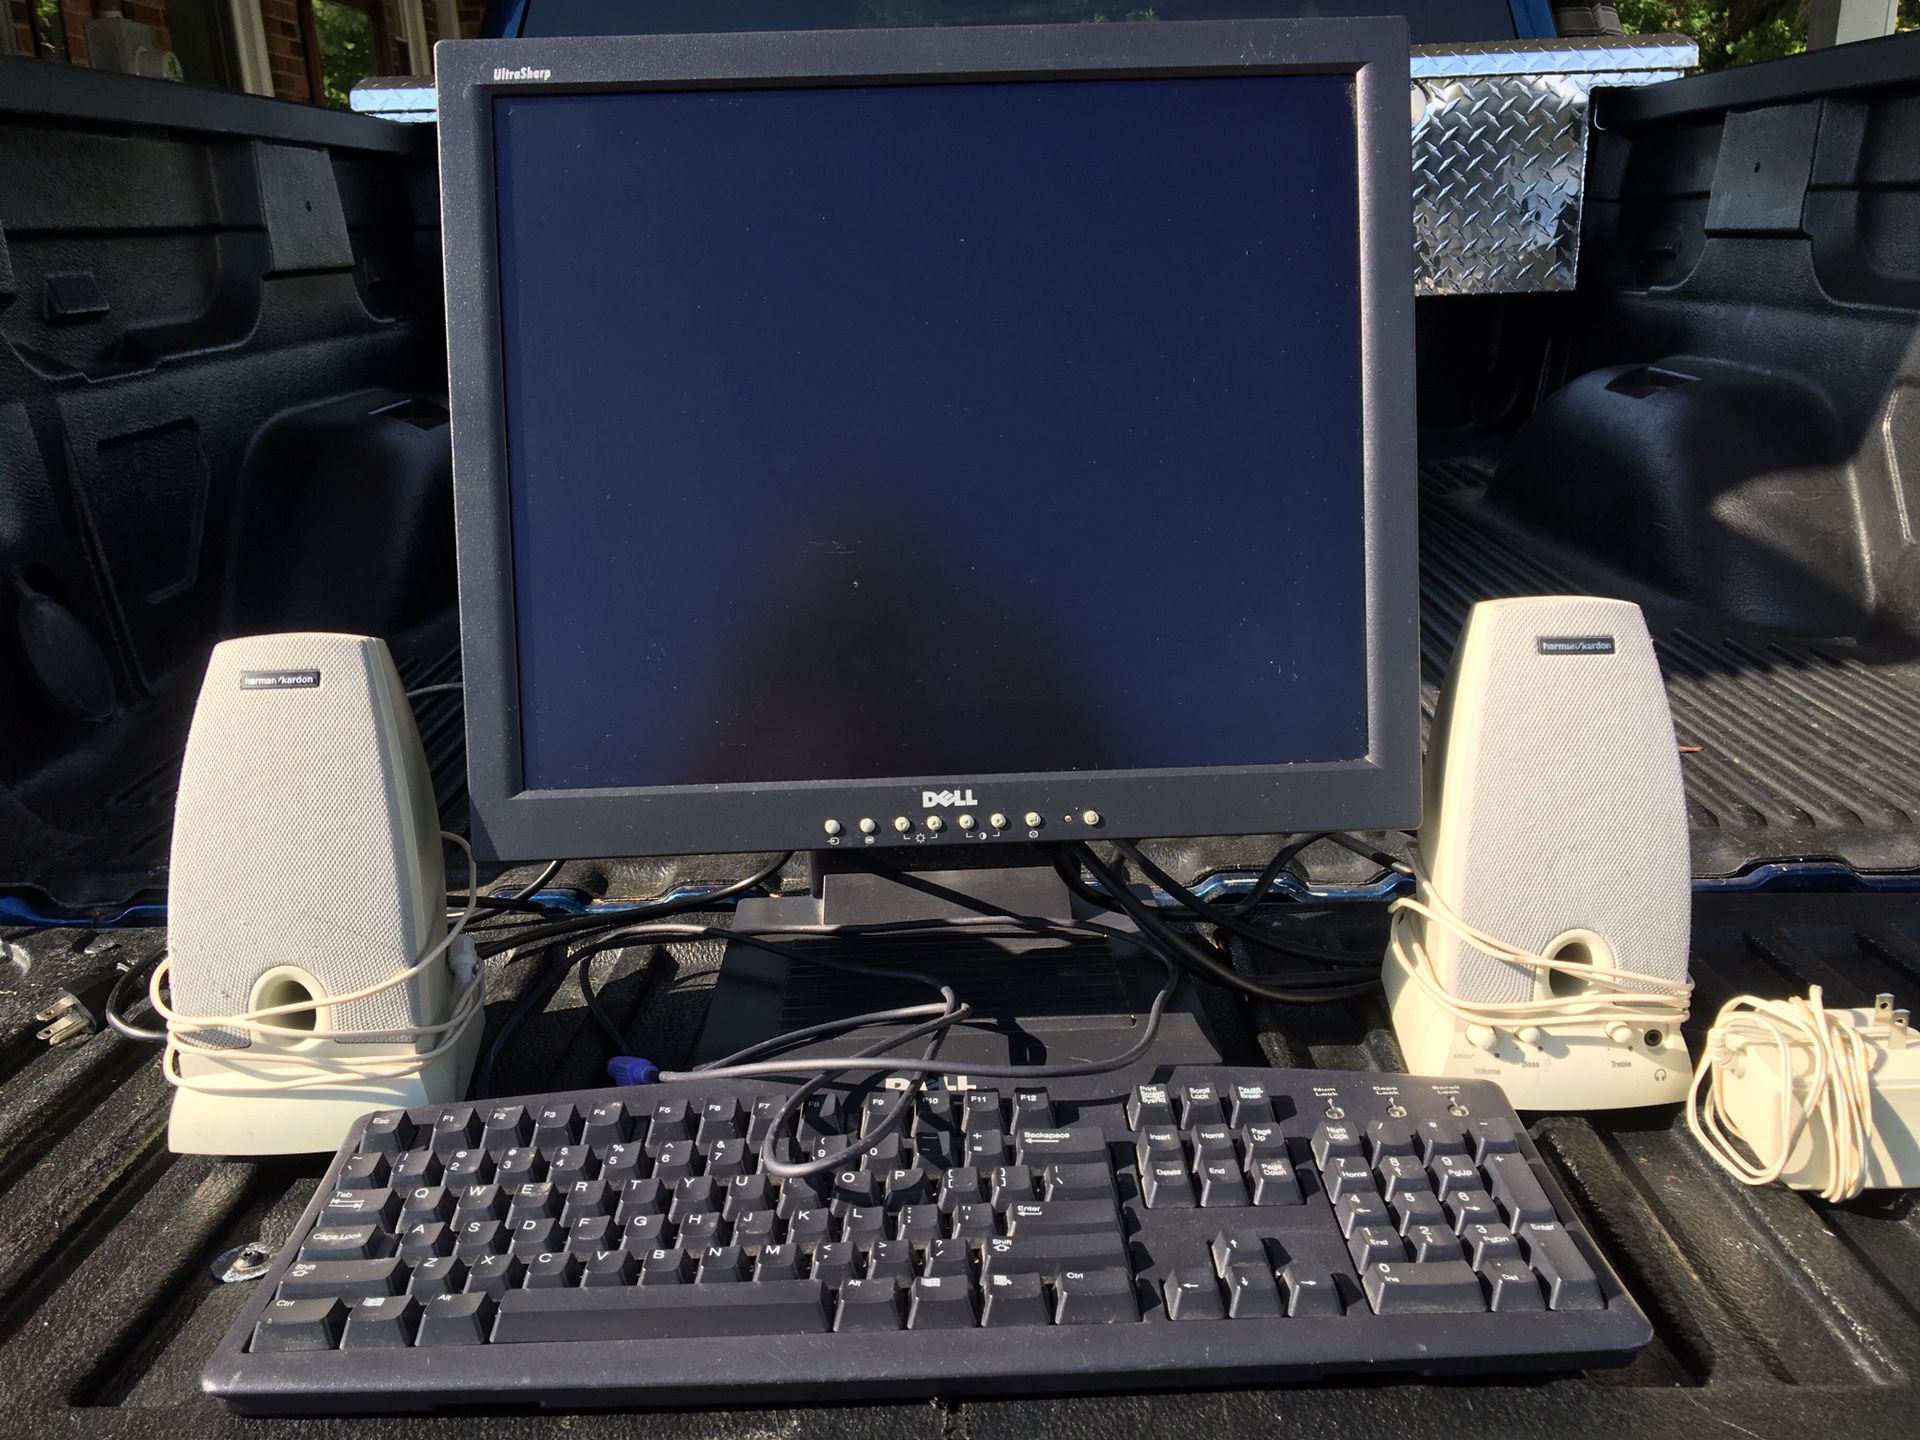 Dell Monitor keyboard and speakers